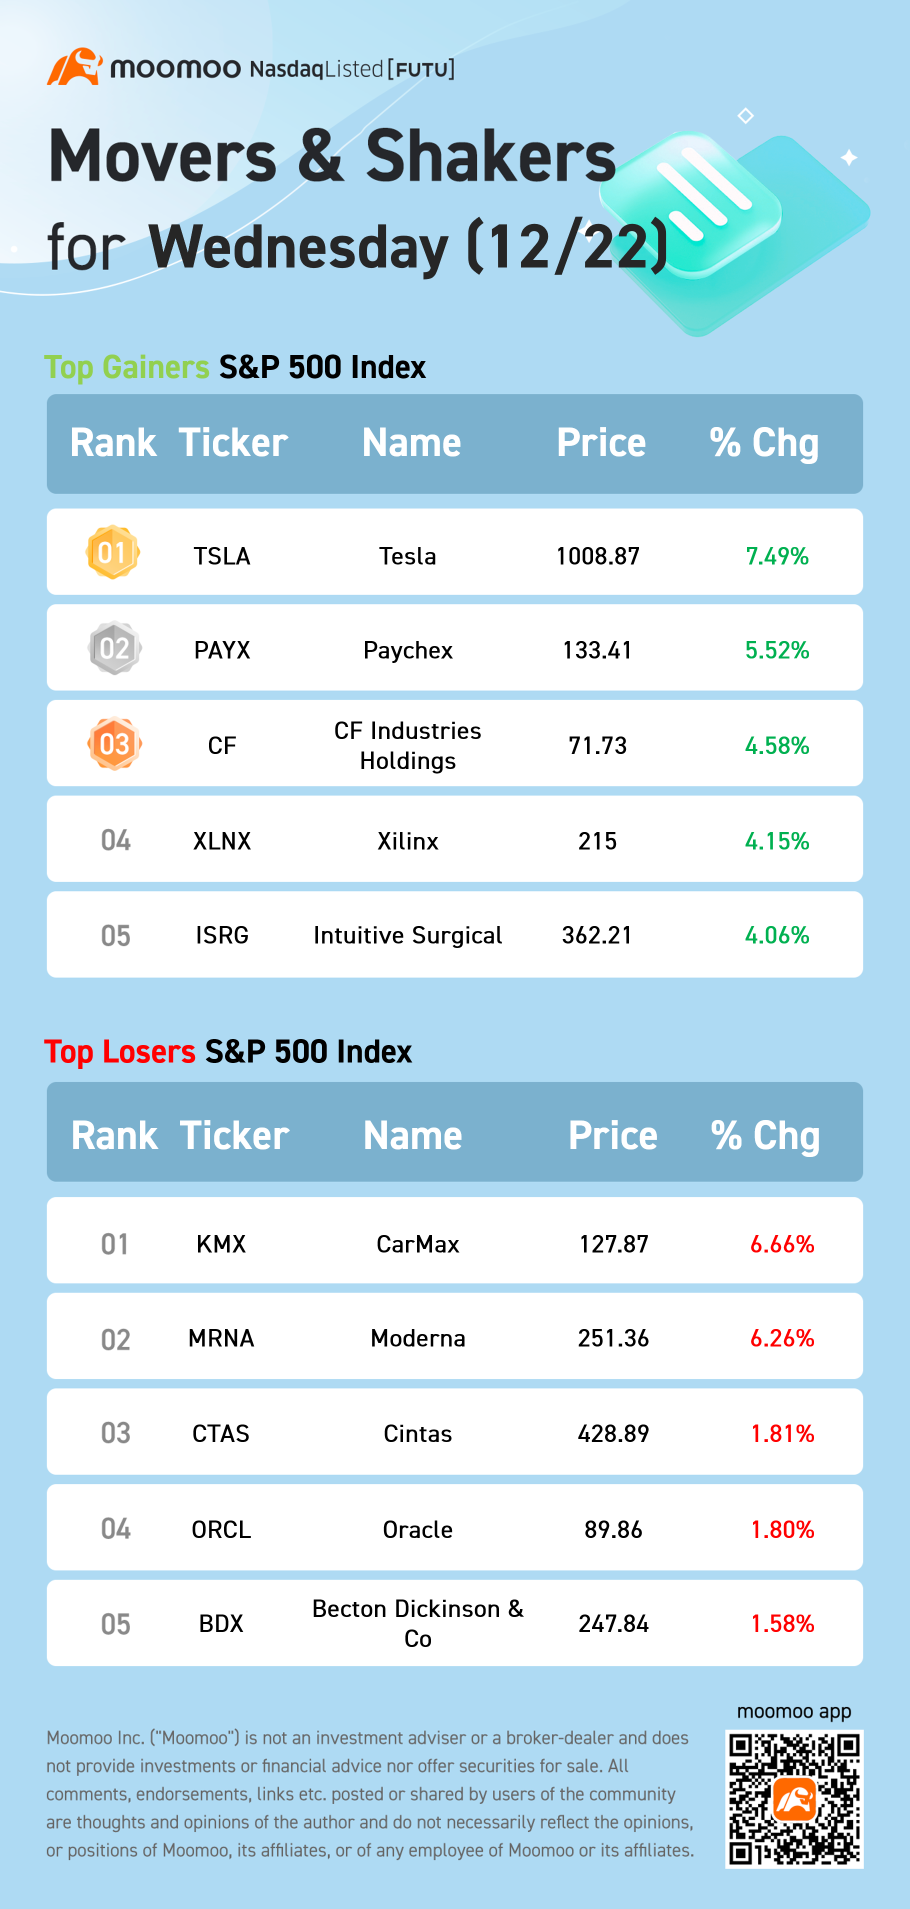 S&P 500 Movers for Wednesday (12/22)